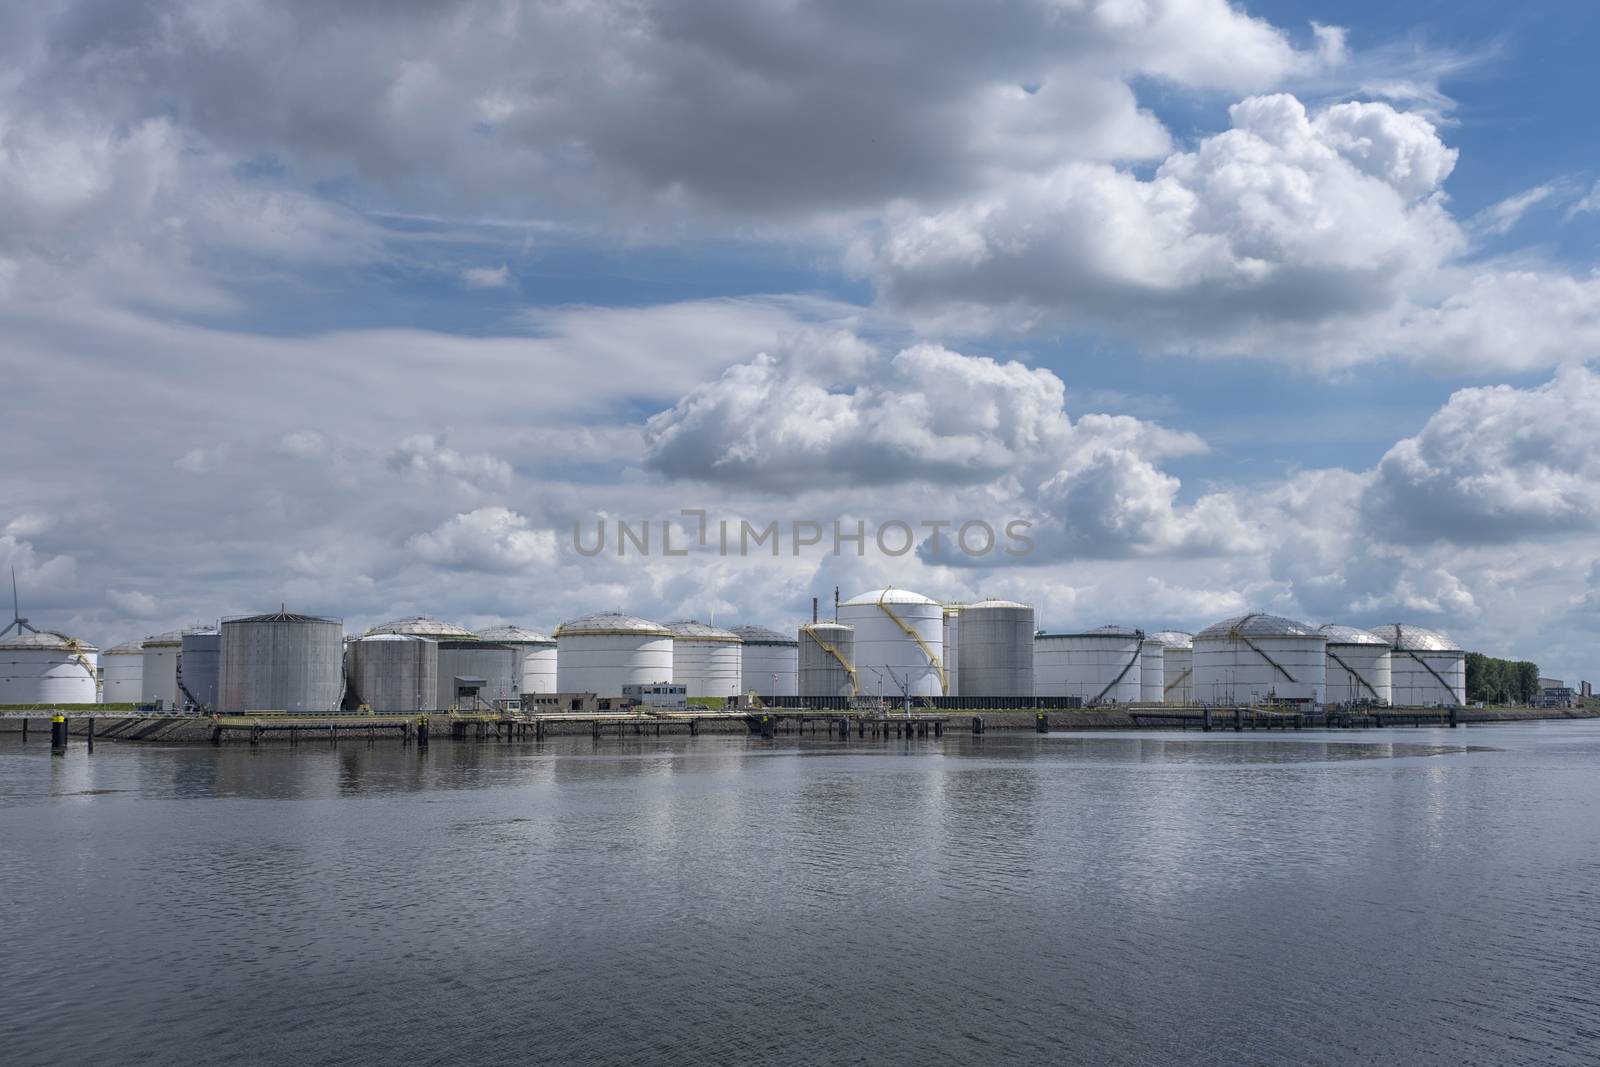 Tanker and oil storage tanks in Rotterdam, Netherlands. The port is the largest in Europe and facilitate the needs of a hinterland by Tjeerdkruse